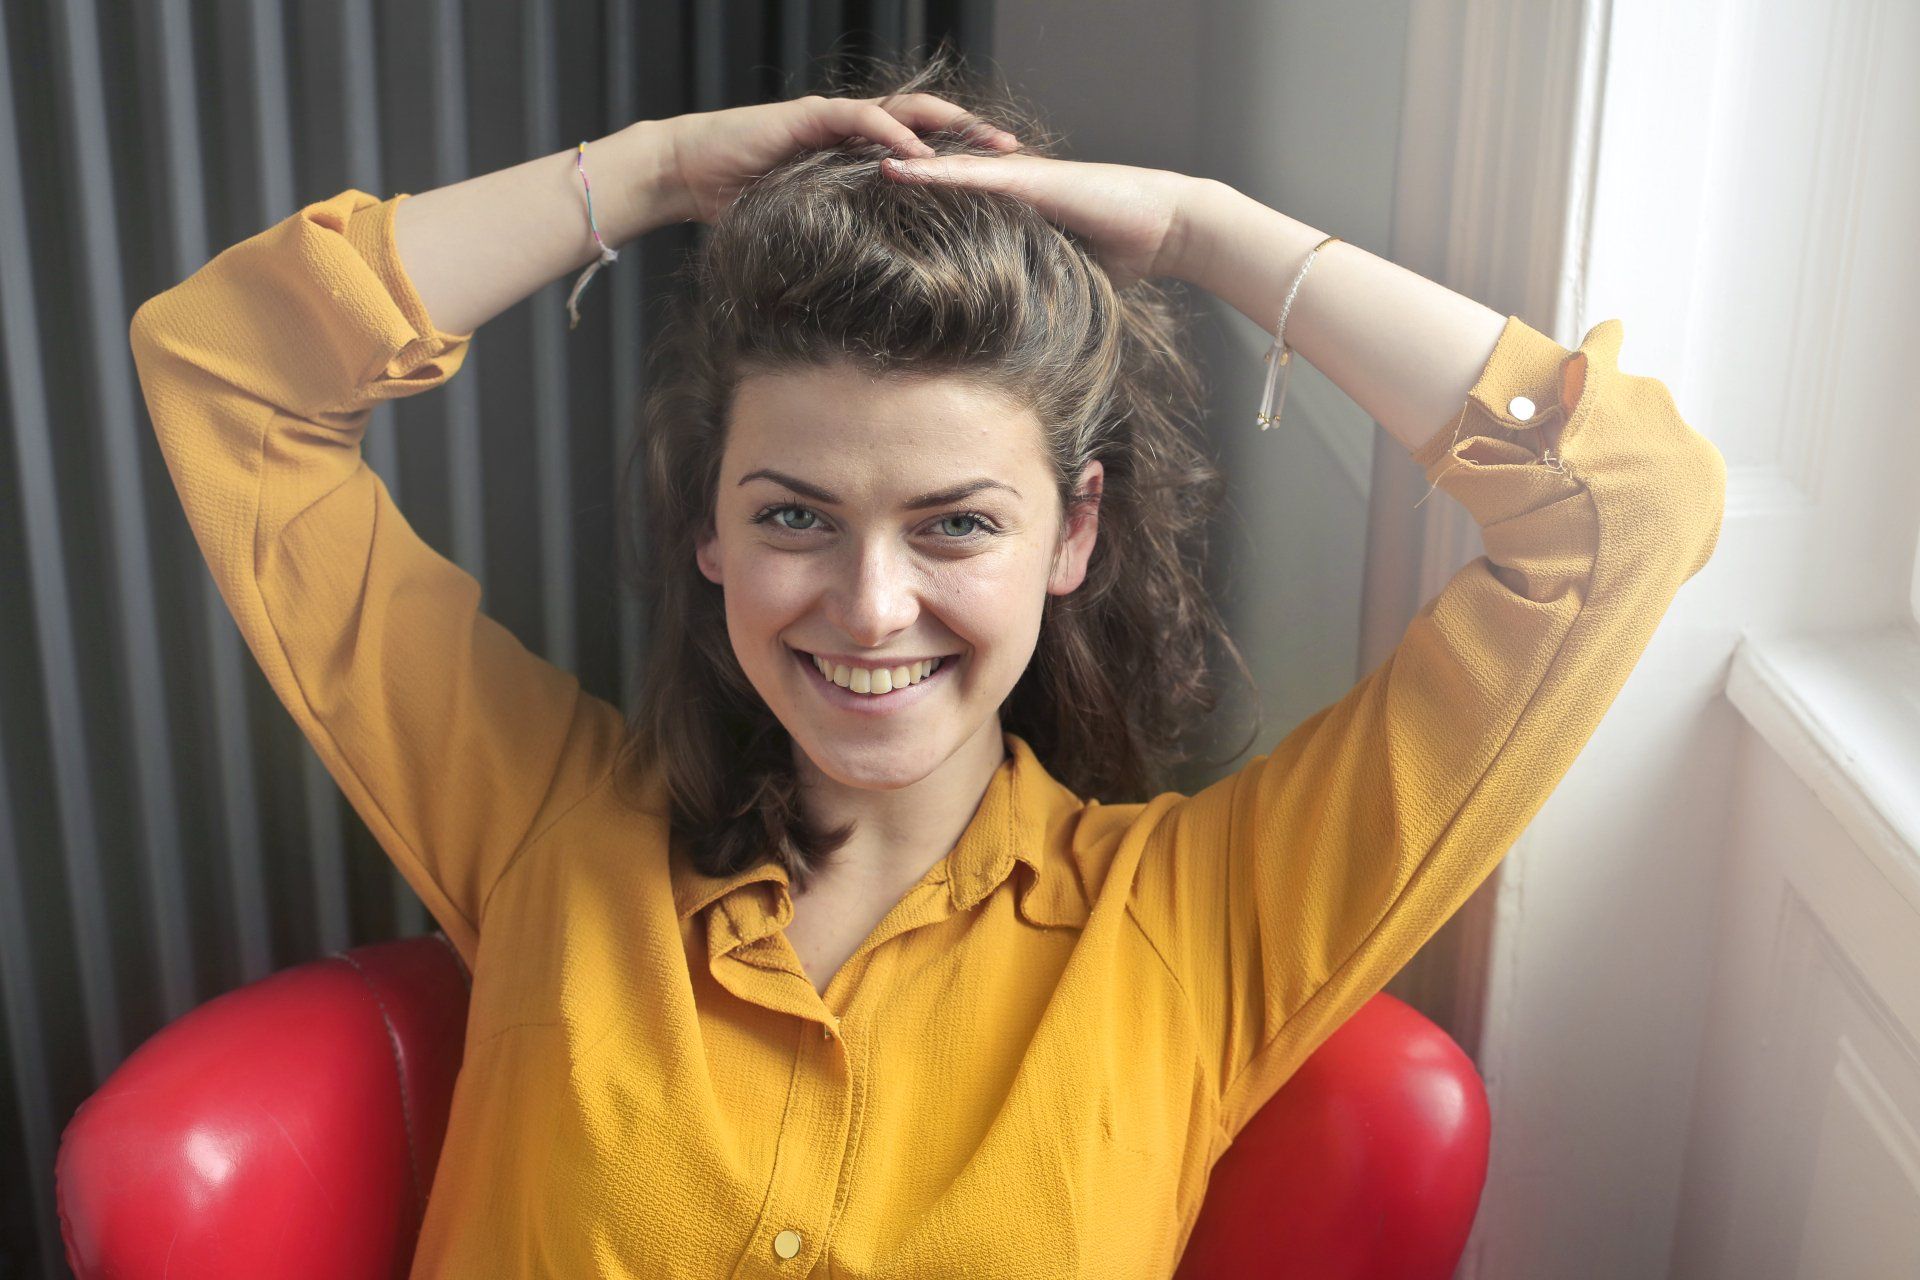 a woman in a yellow shirt is smiling with her hands in her hair